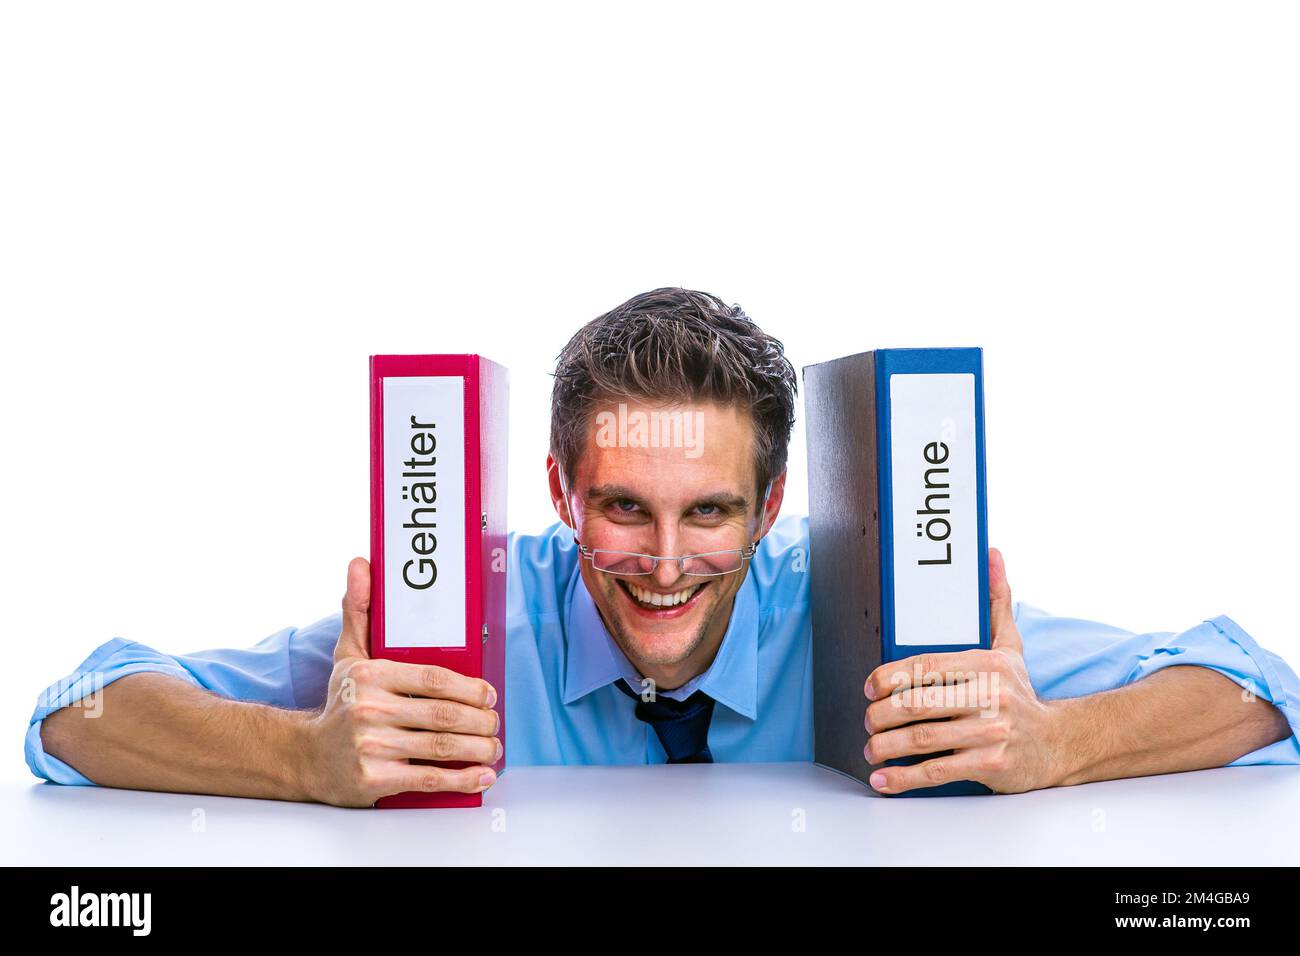 young positive businessman with folders lettering Gehaelter and Loehne, salaries and wages, Germany Stock Photo